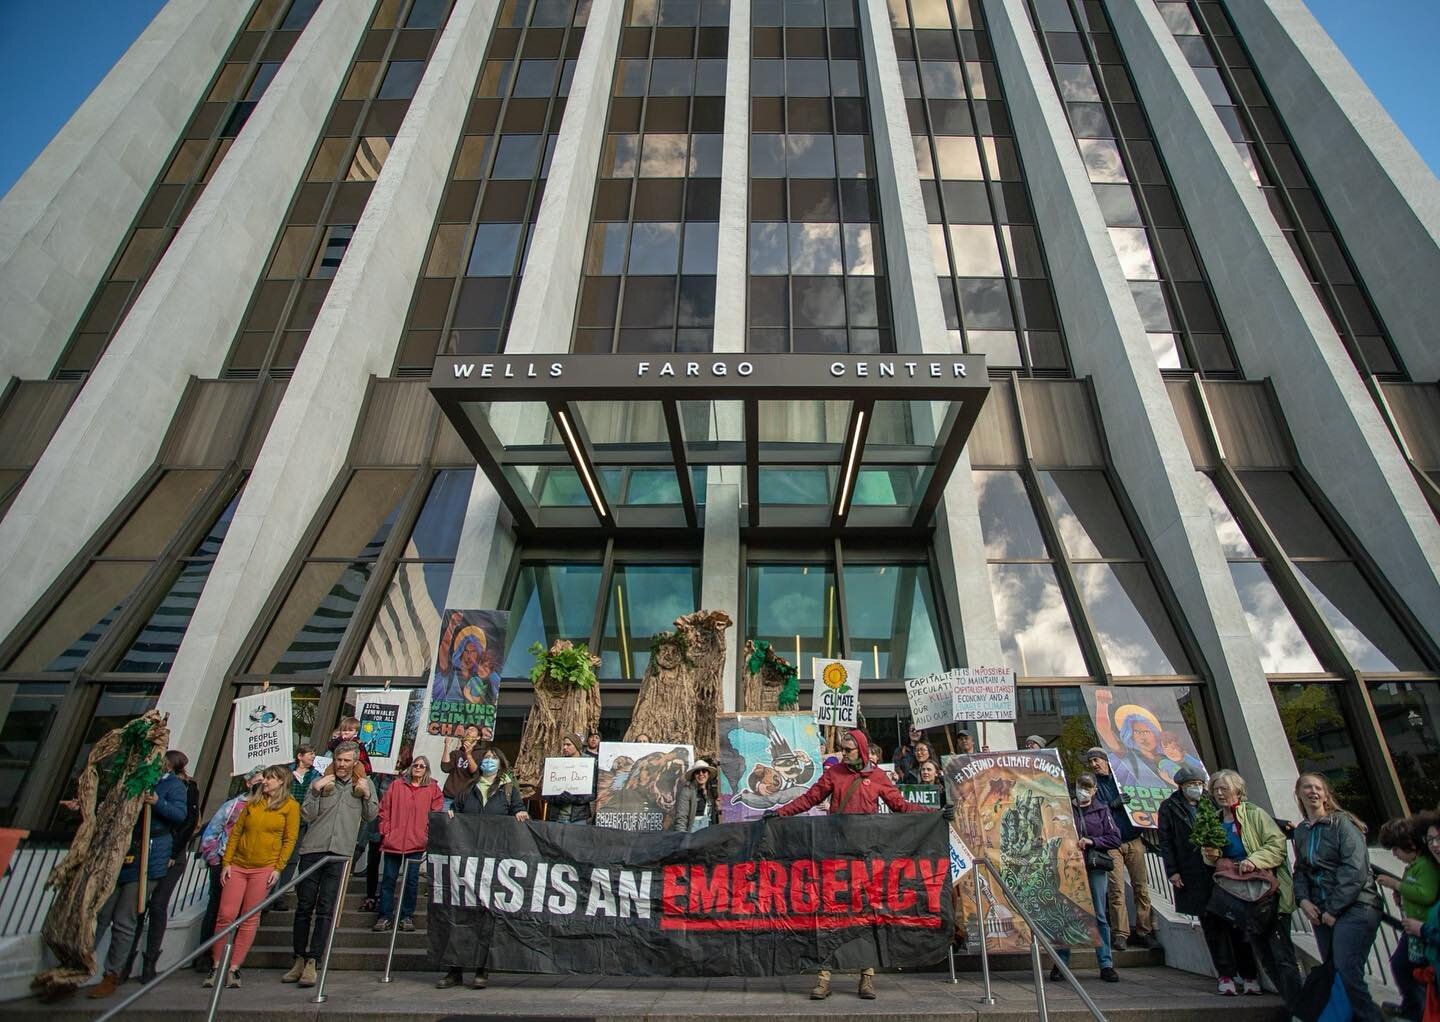 Community members across from Campbell Global&rsquo;s headquarters last week, demanding an end to forest and climate greenwashing and call for a Just Transition for PNW forests. The climate crisis is intensifying and unrelenting. Financial institutio